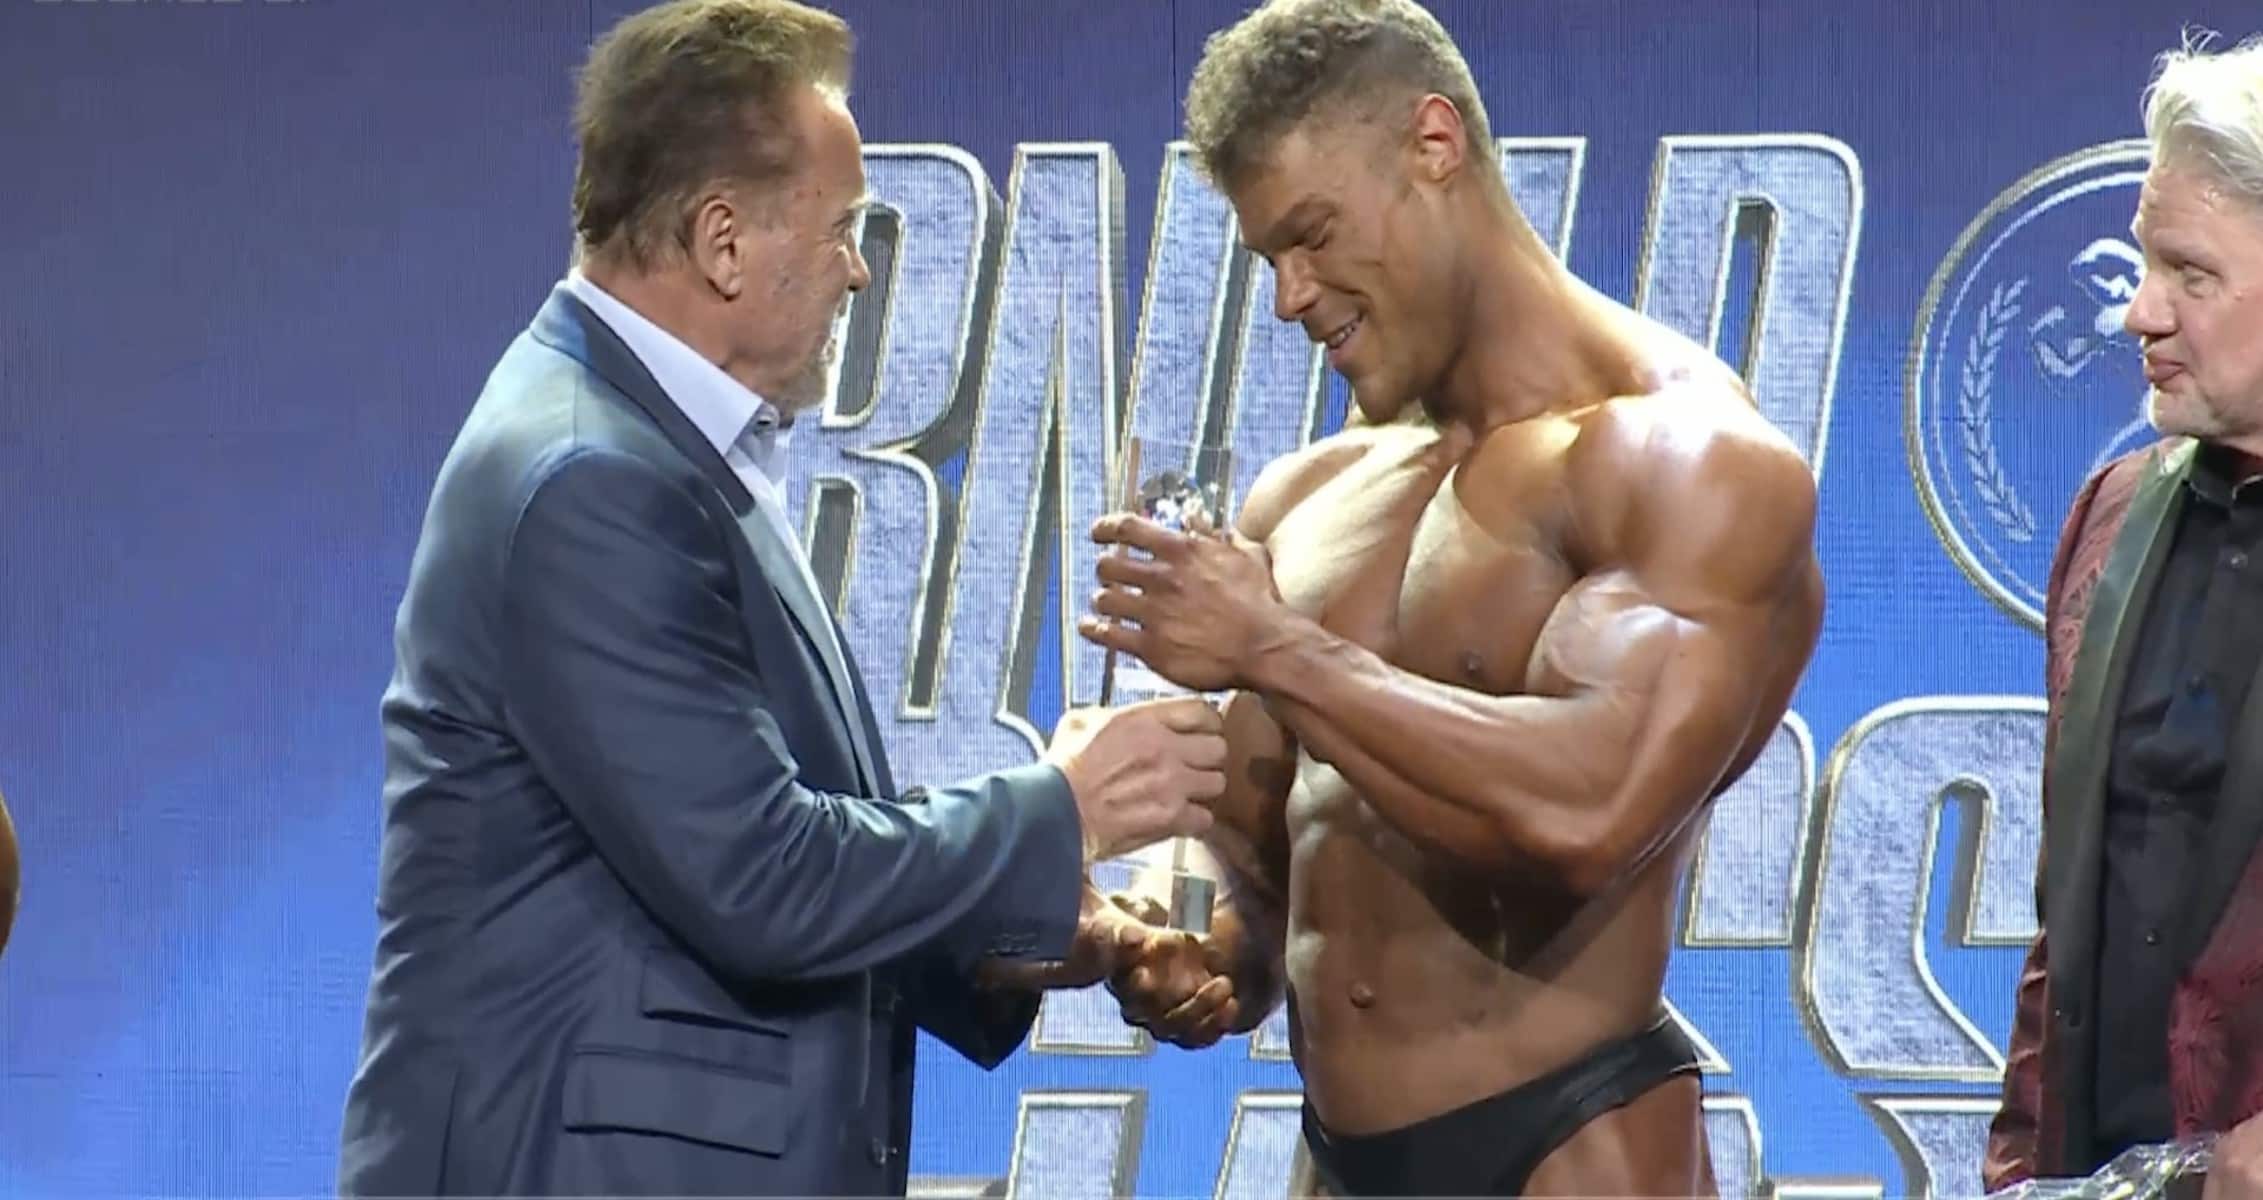 wesley vissers wins Arnold Classic